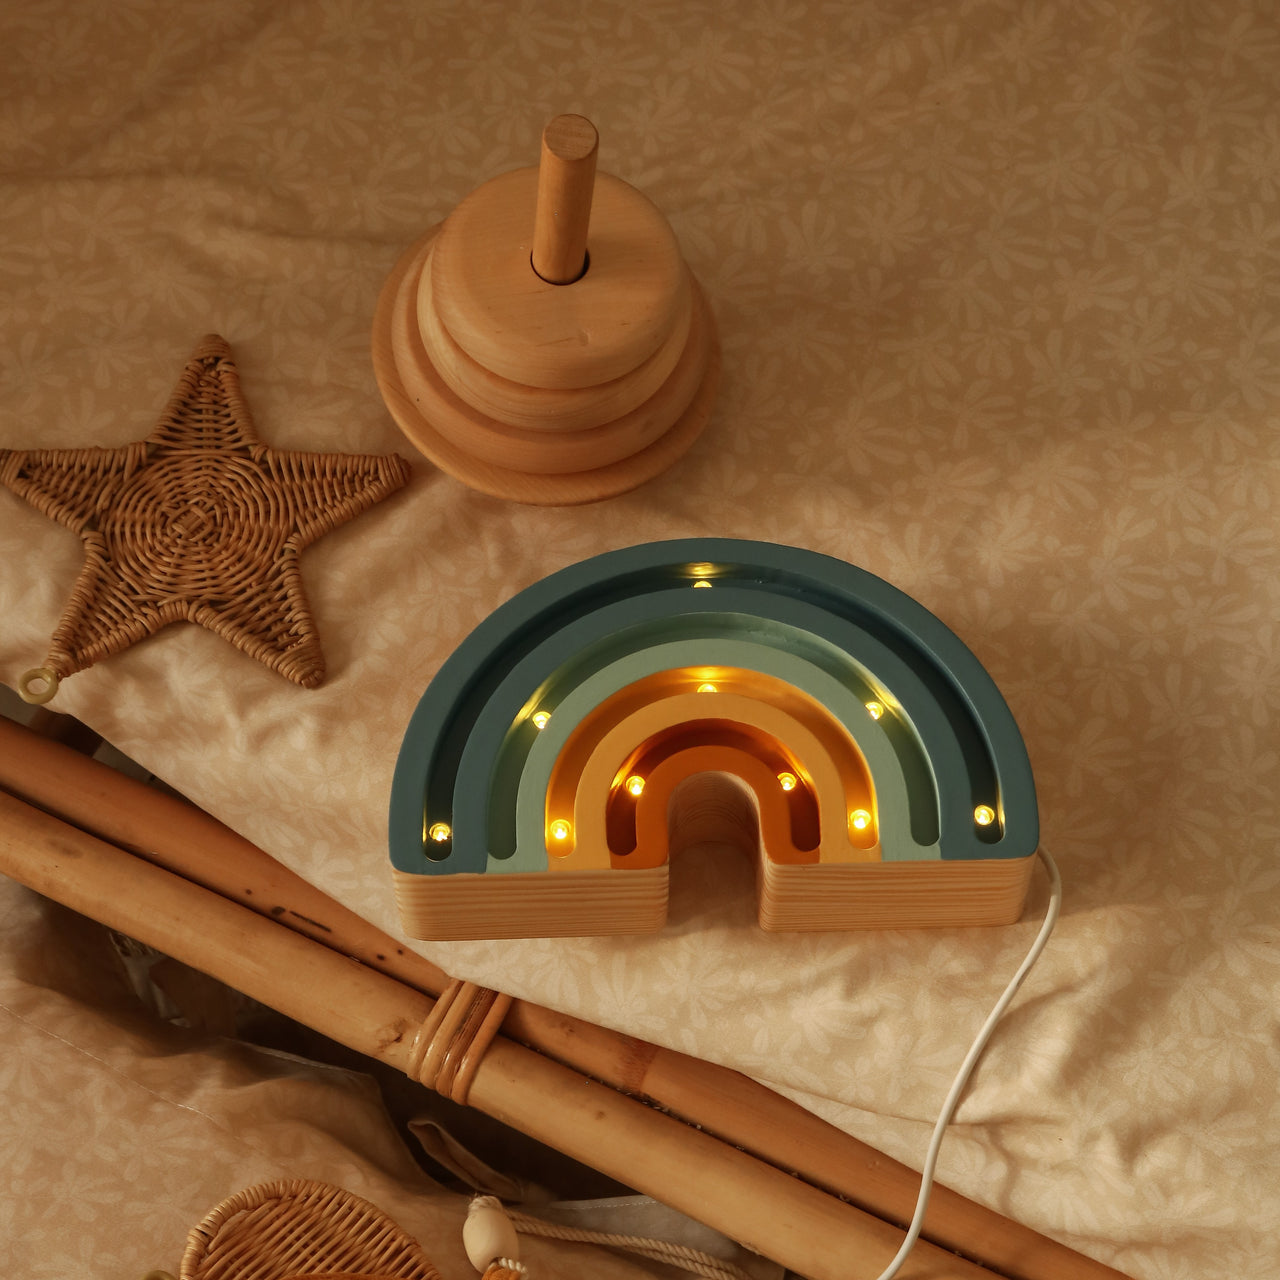 This high-quality Rainbow Denim Blue children’s night light is made of 100% natural pine wood. Little Lights are created by hand in a small factory in Krakow. It is not only a beautiful object for everyday use, but also a keepsake that will last throughout childhood and remain in the family for generations.